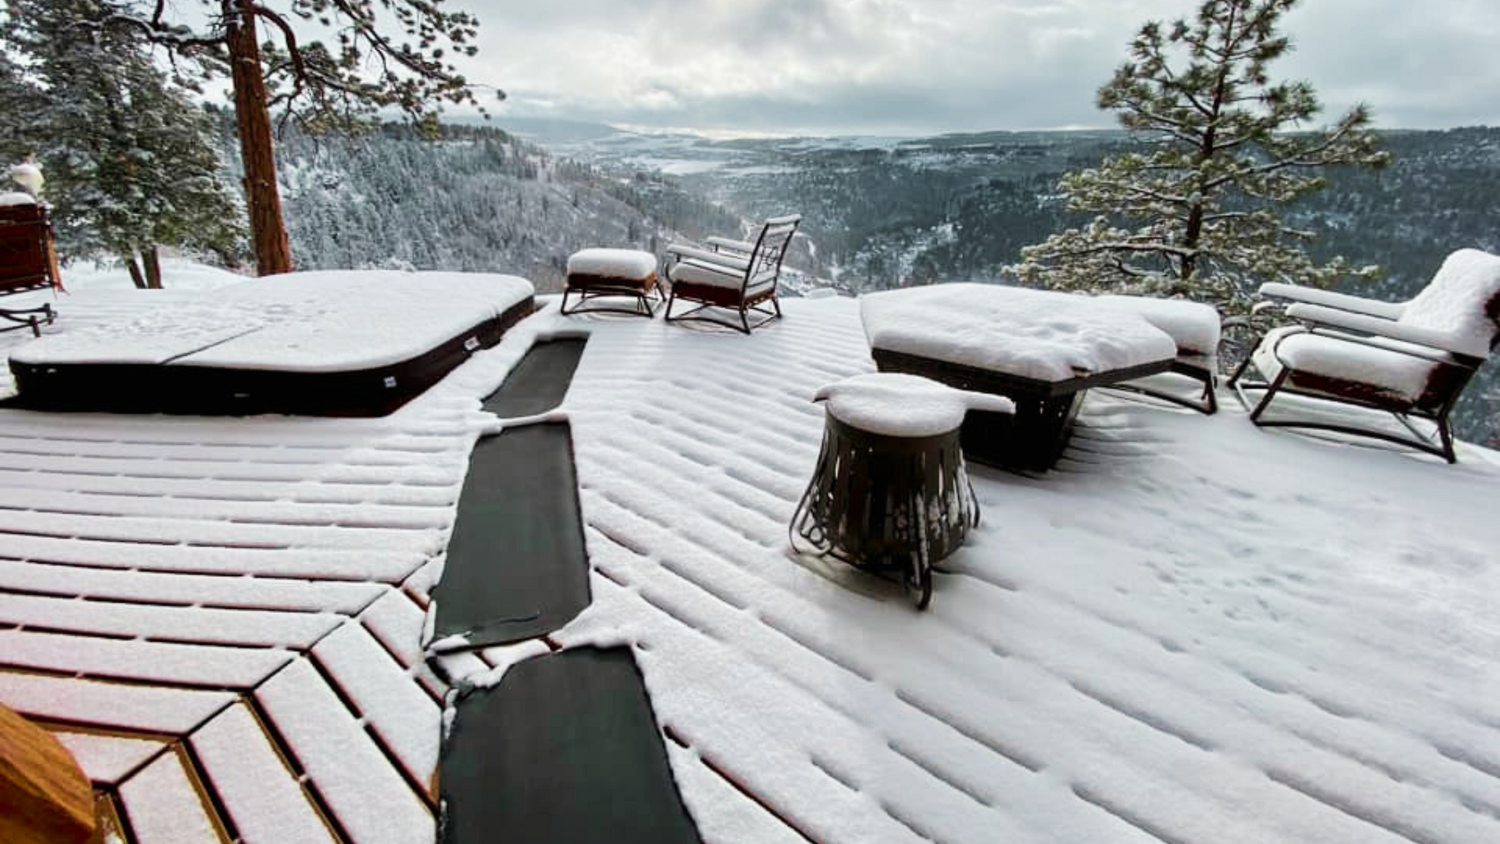 The 5 Best Heated Outdoor Mats That Melt Snow and Ice 2023